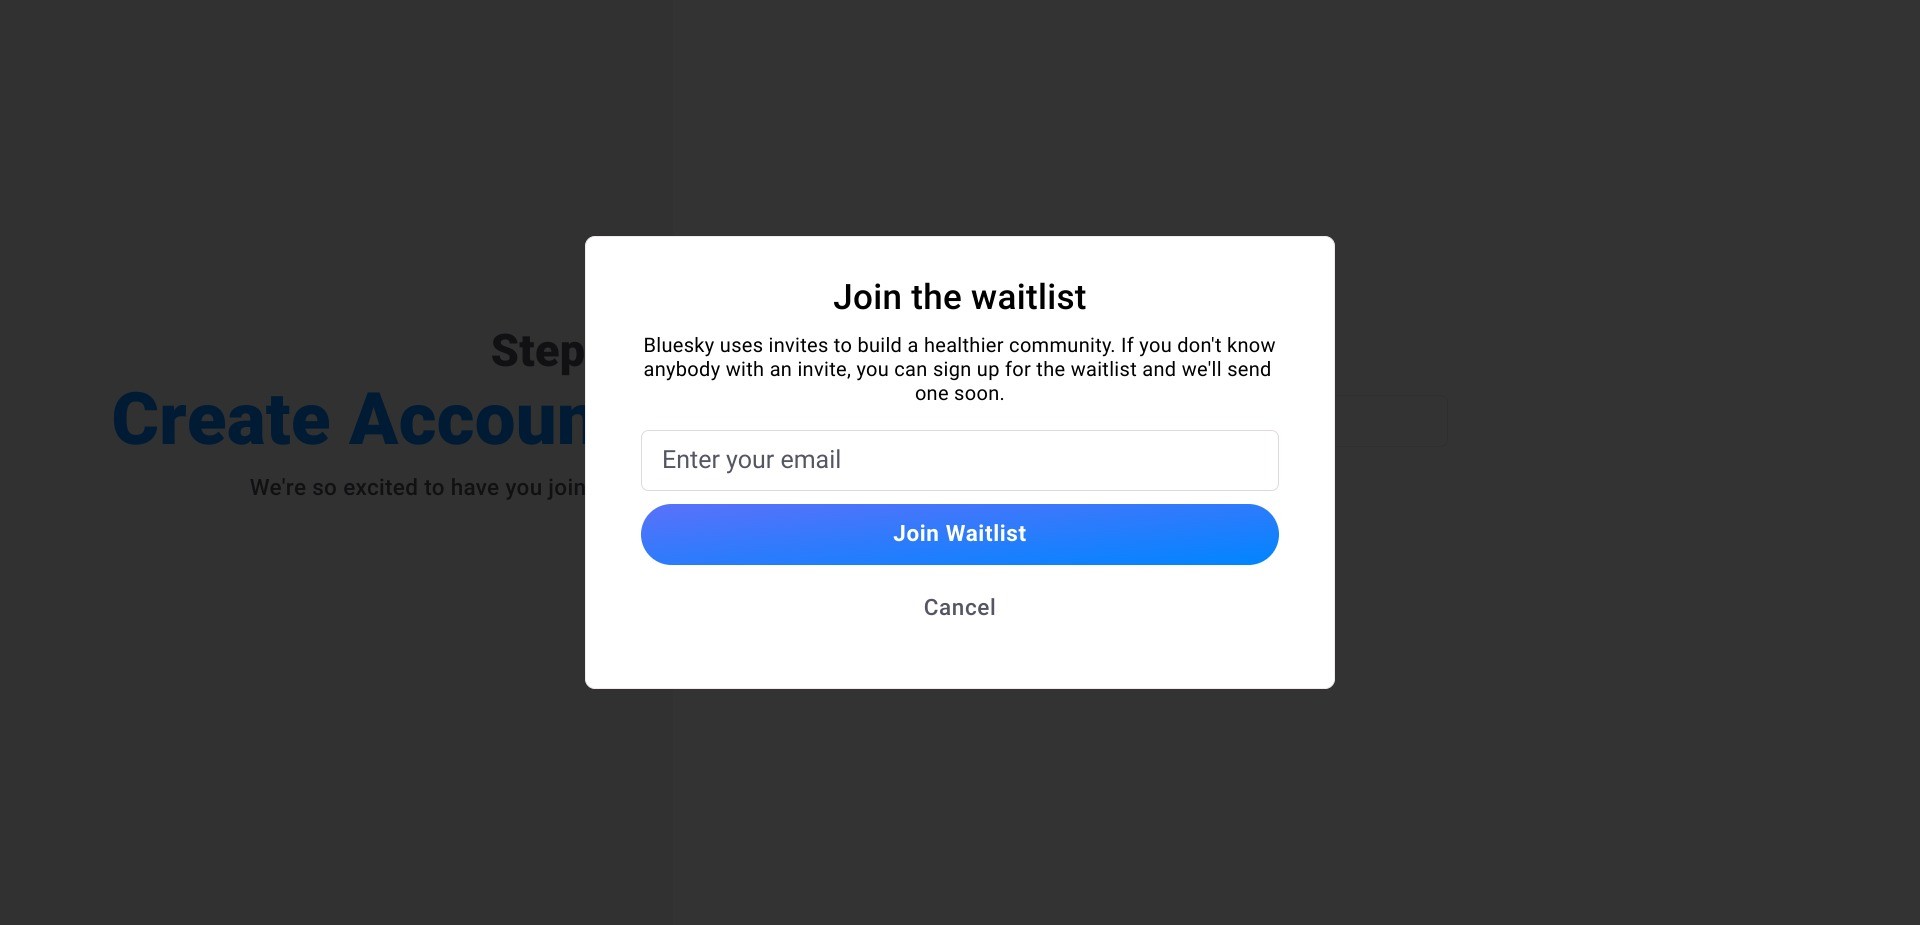 Screenshot of bsky.app displaying the option to join the waitlist